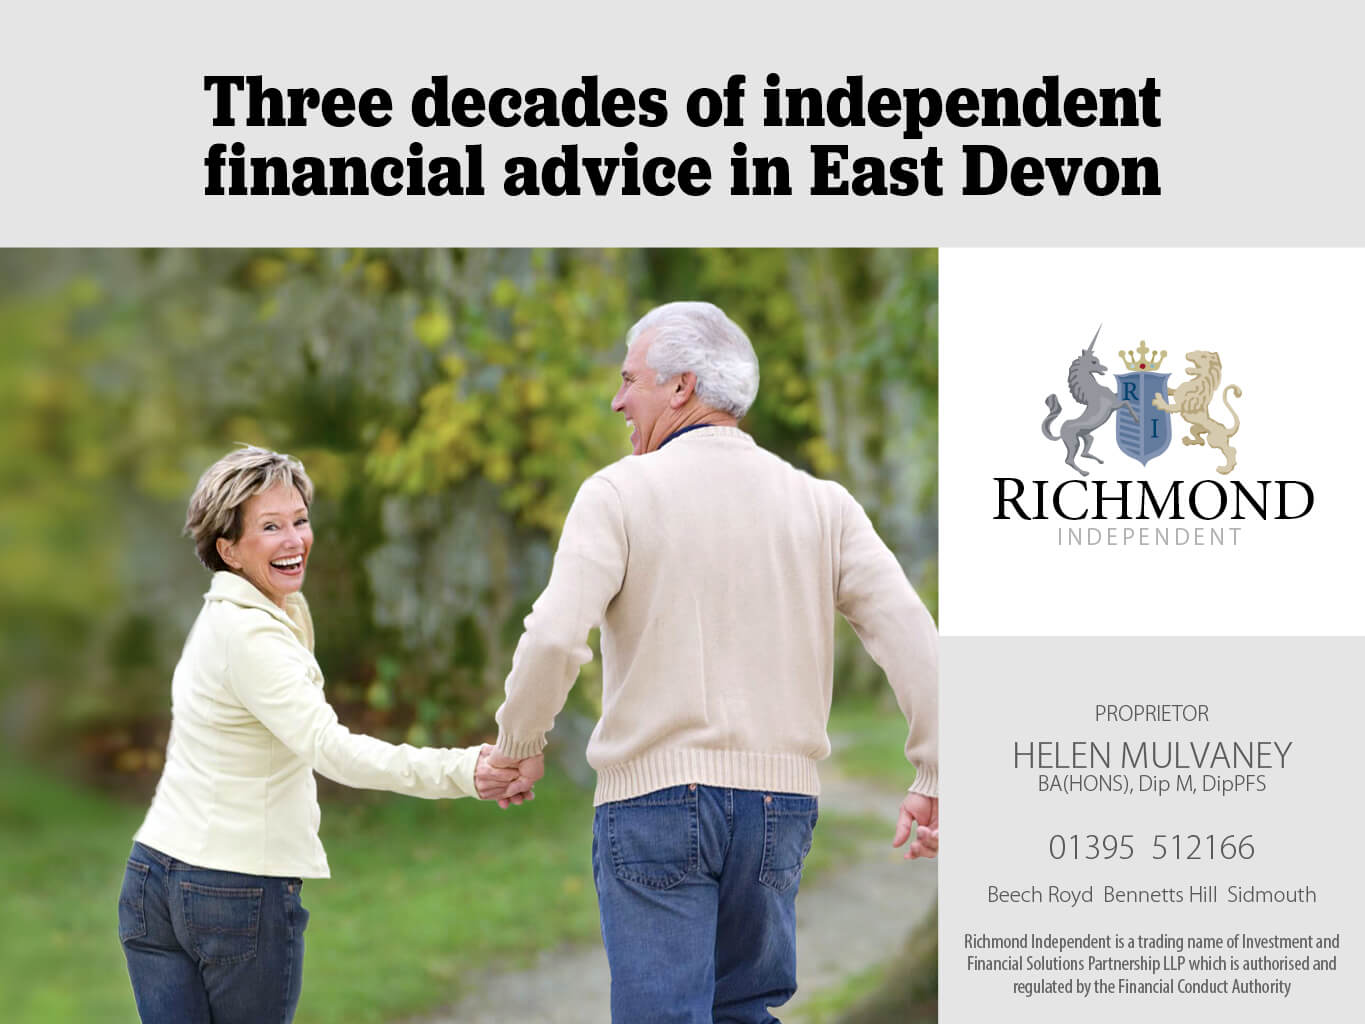 Celebrating 30 years of financial advice